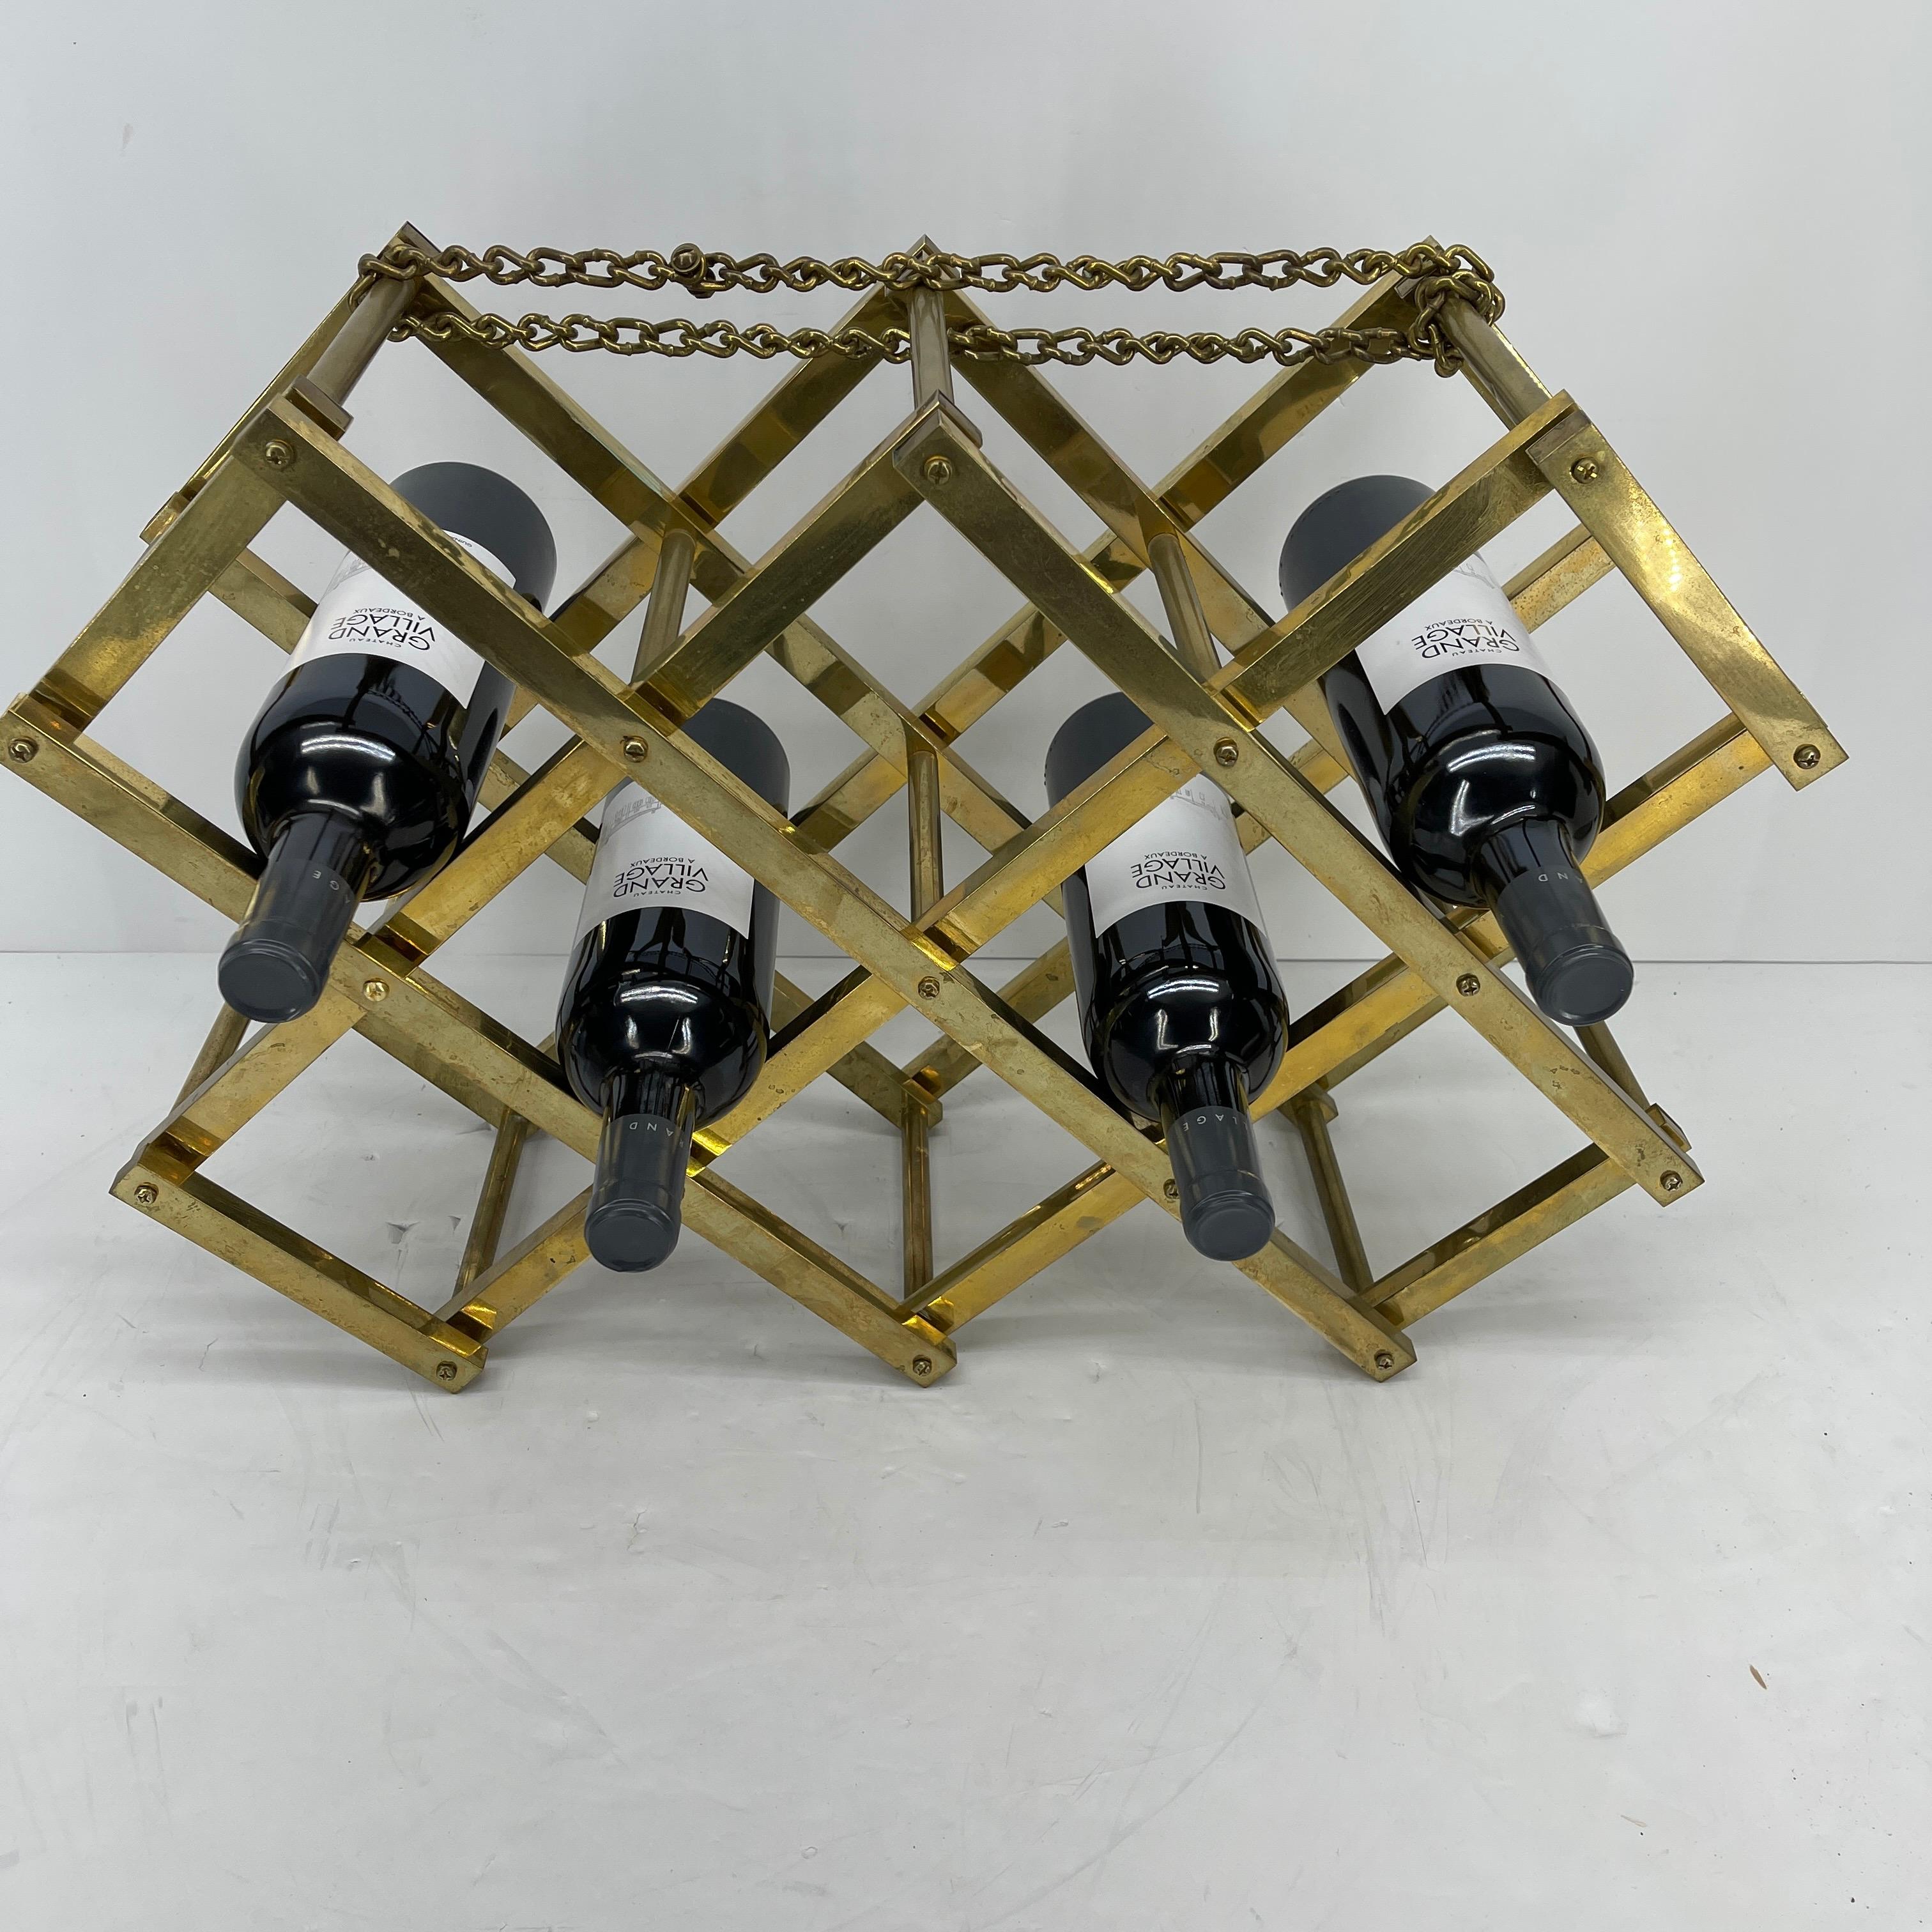 Mid-Century Modern brass wine rack. This vintage elegant wine bottle holder is sturdy with it's bold brass chain holding all the bottles in place. The folding rack holds 10 ten bottles of wine. The brass has a vintage patina, which adds to it's